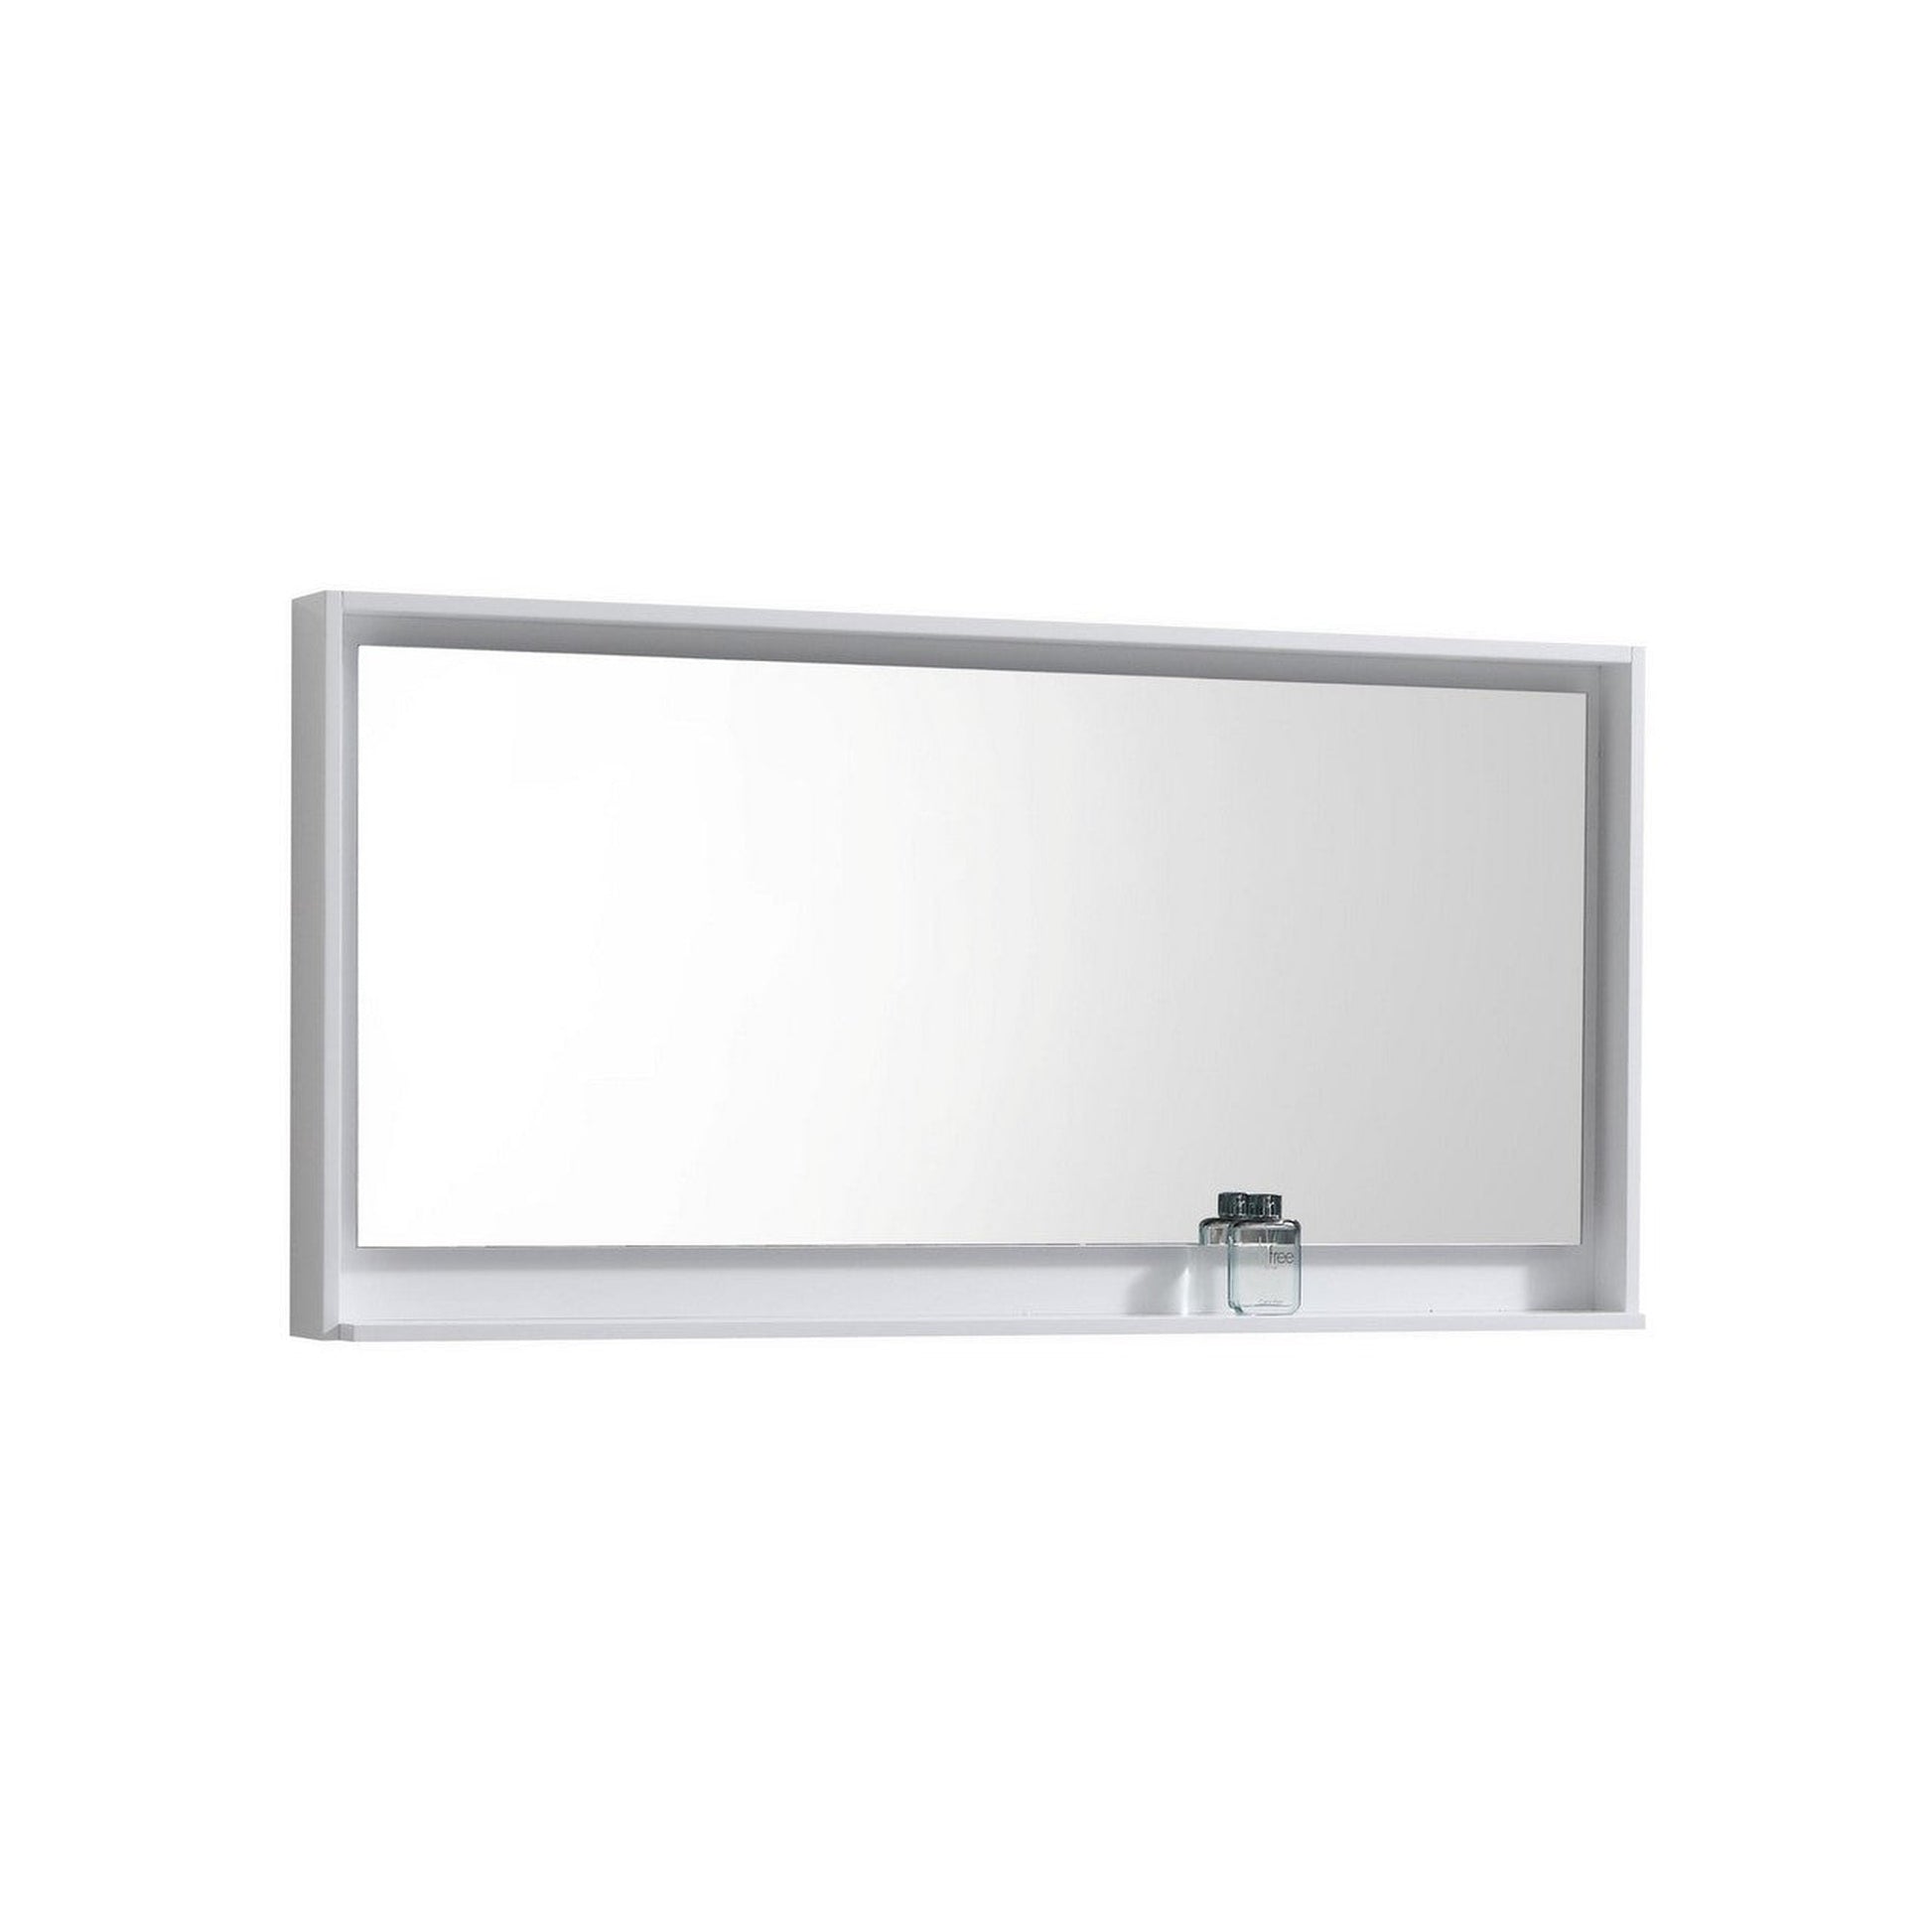 KubeBath Bliss 60" High Gloss White Wall-Mounted Modern Bathroom Vanity With Double Integrated Acrylic Sink With Overflow and 60" White Framed Mirror With Shelf